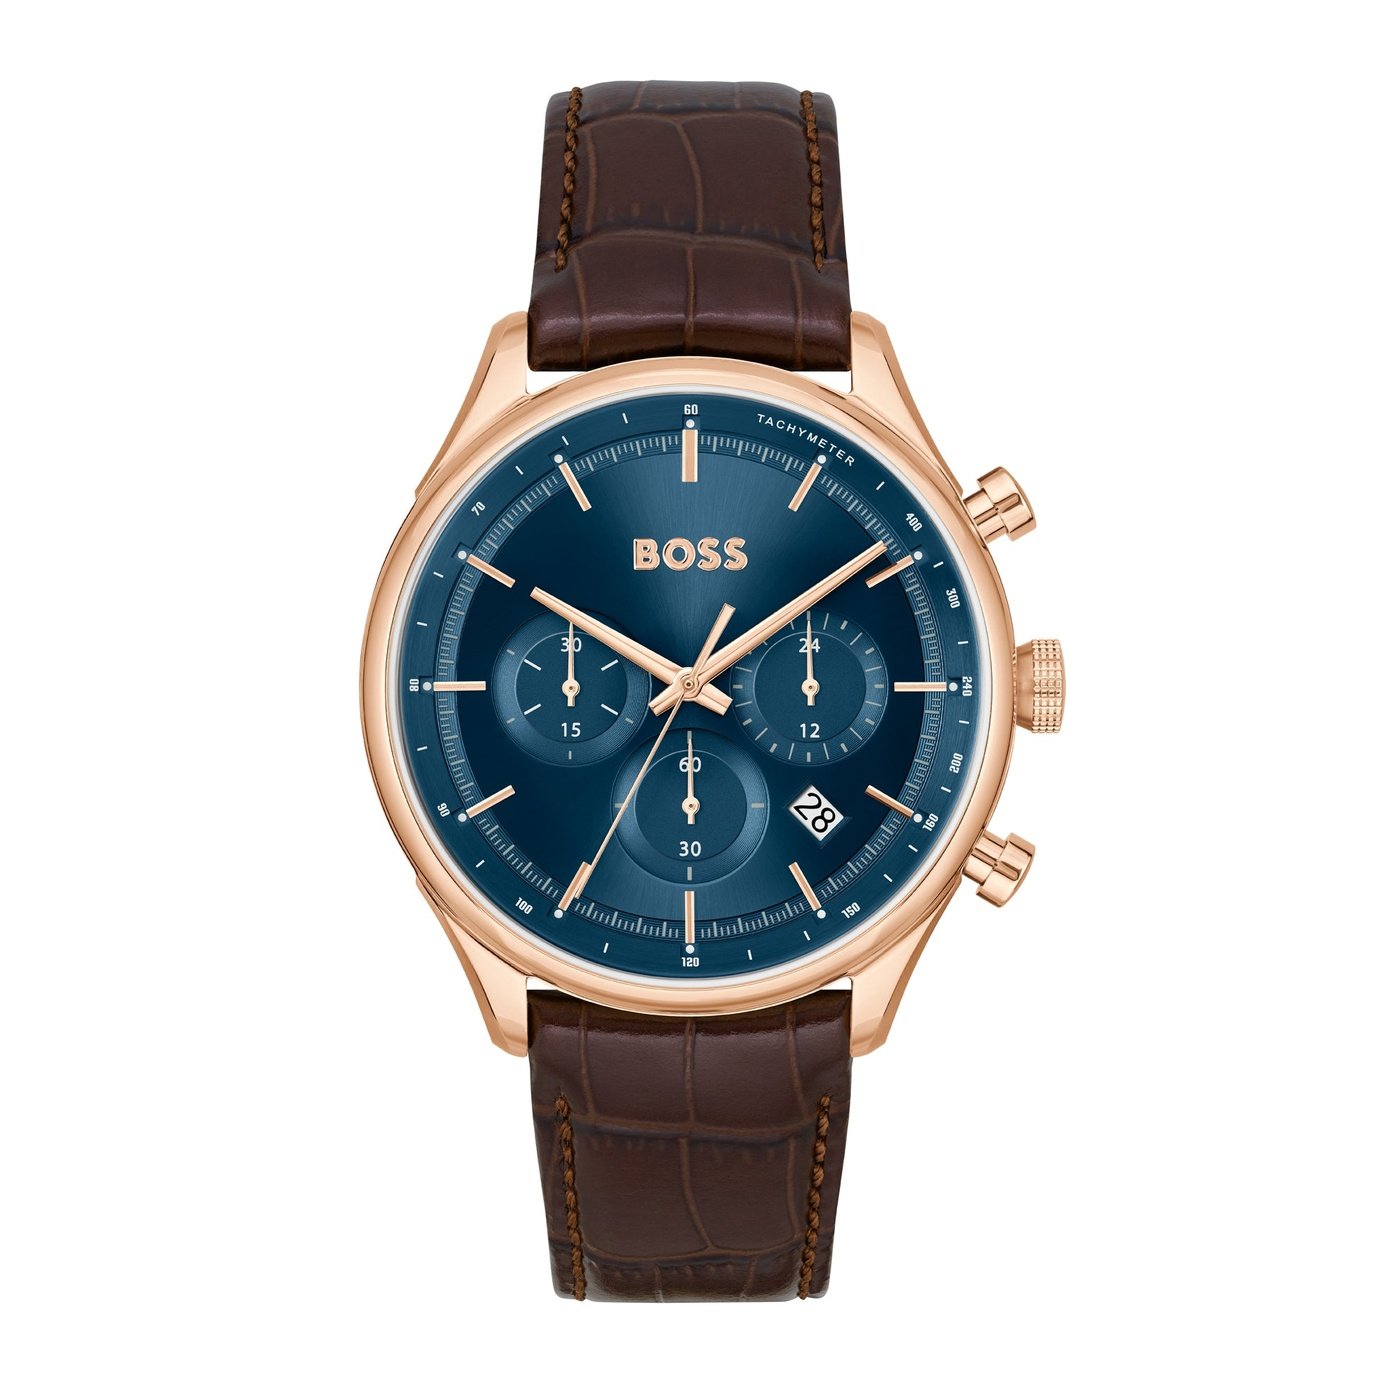 For And Men Online | HUGO Women BOSS Now Shop Watches